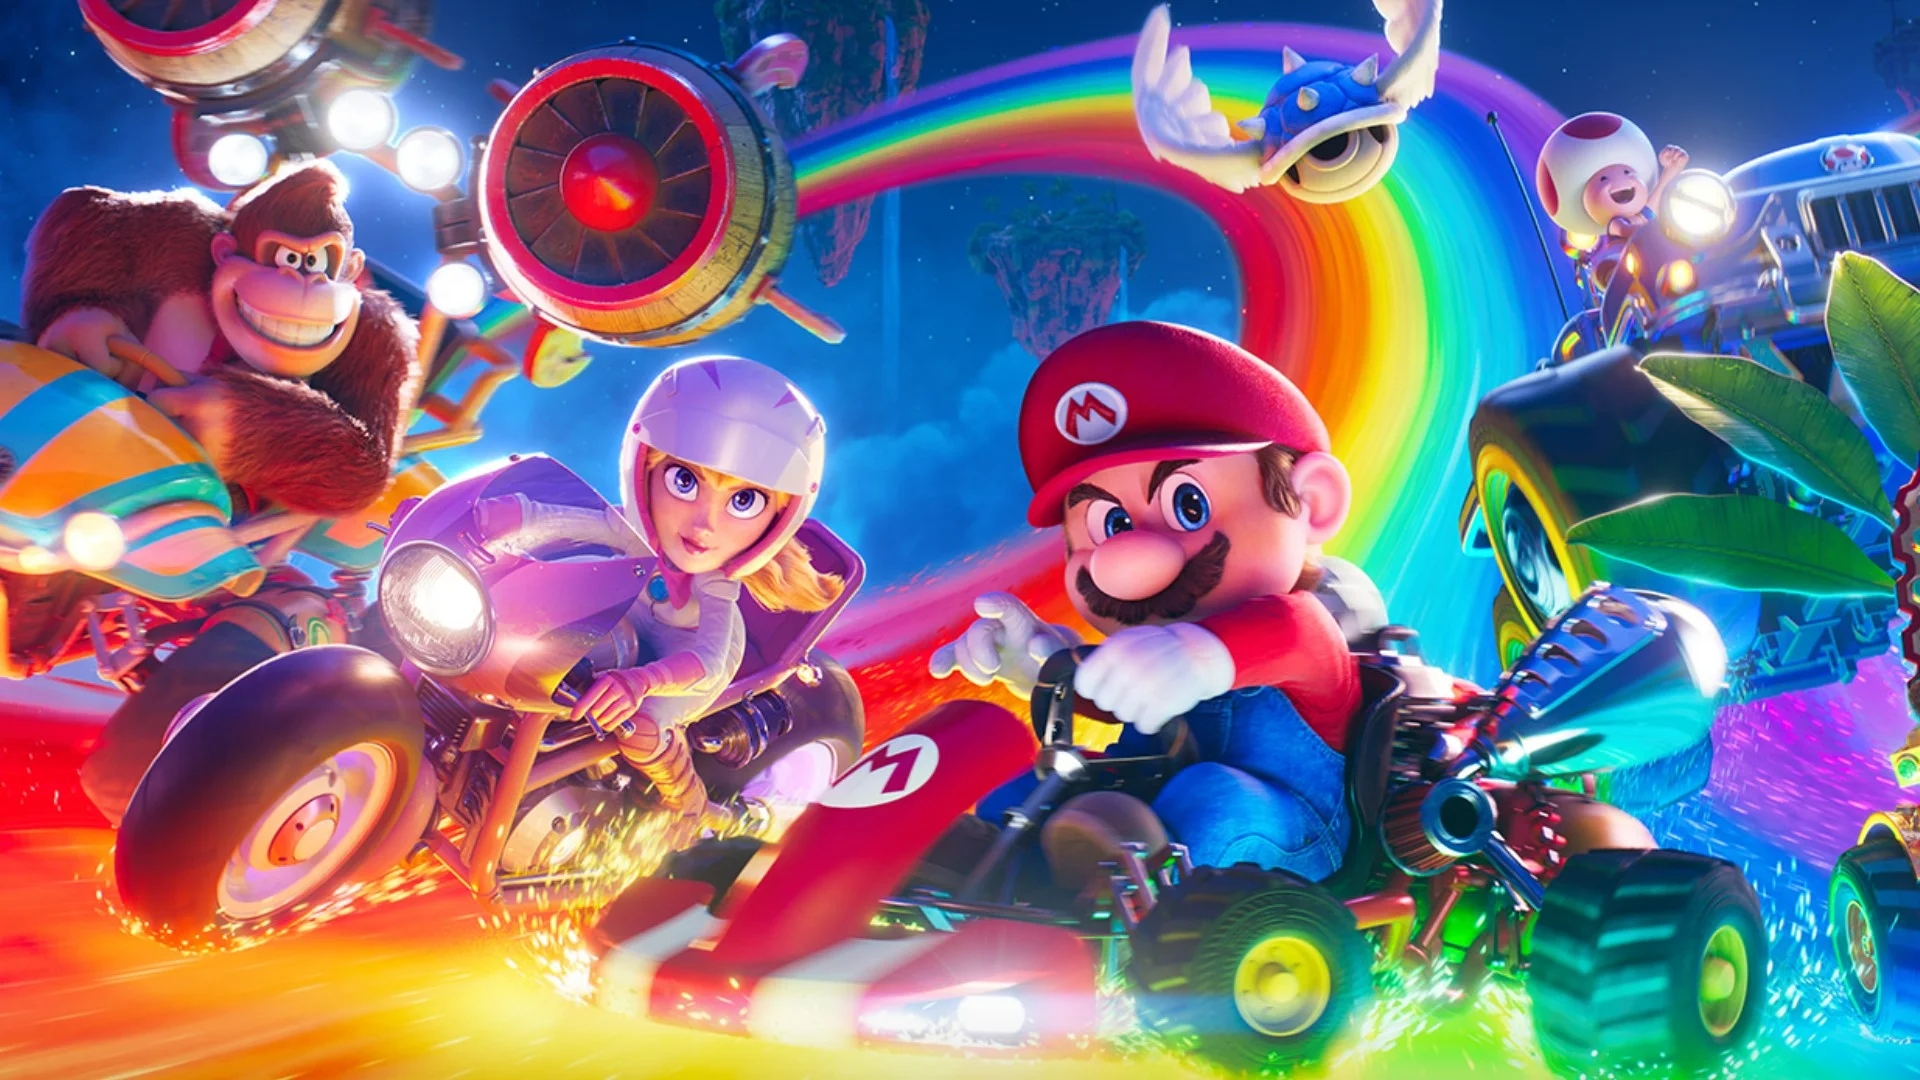 ‘The Super Mario Bros. Movie’ is coming to Peacock on August 3rd